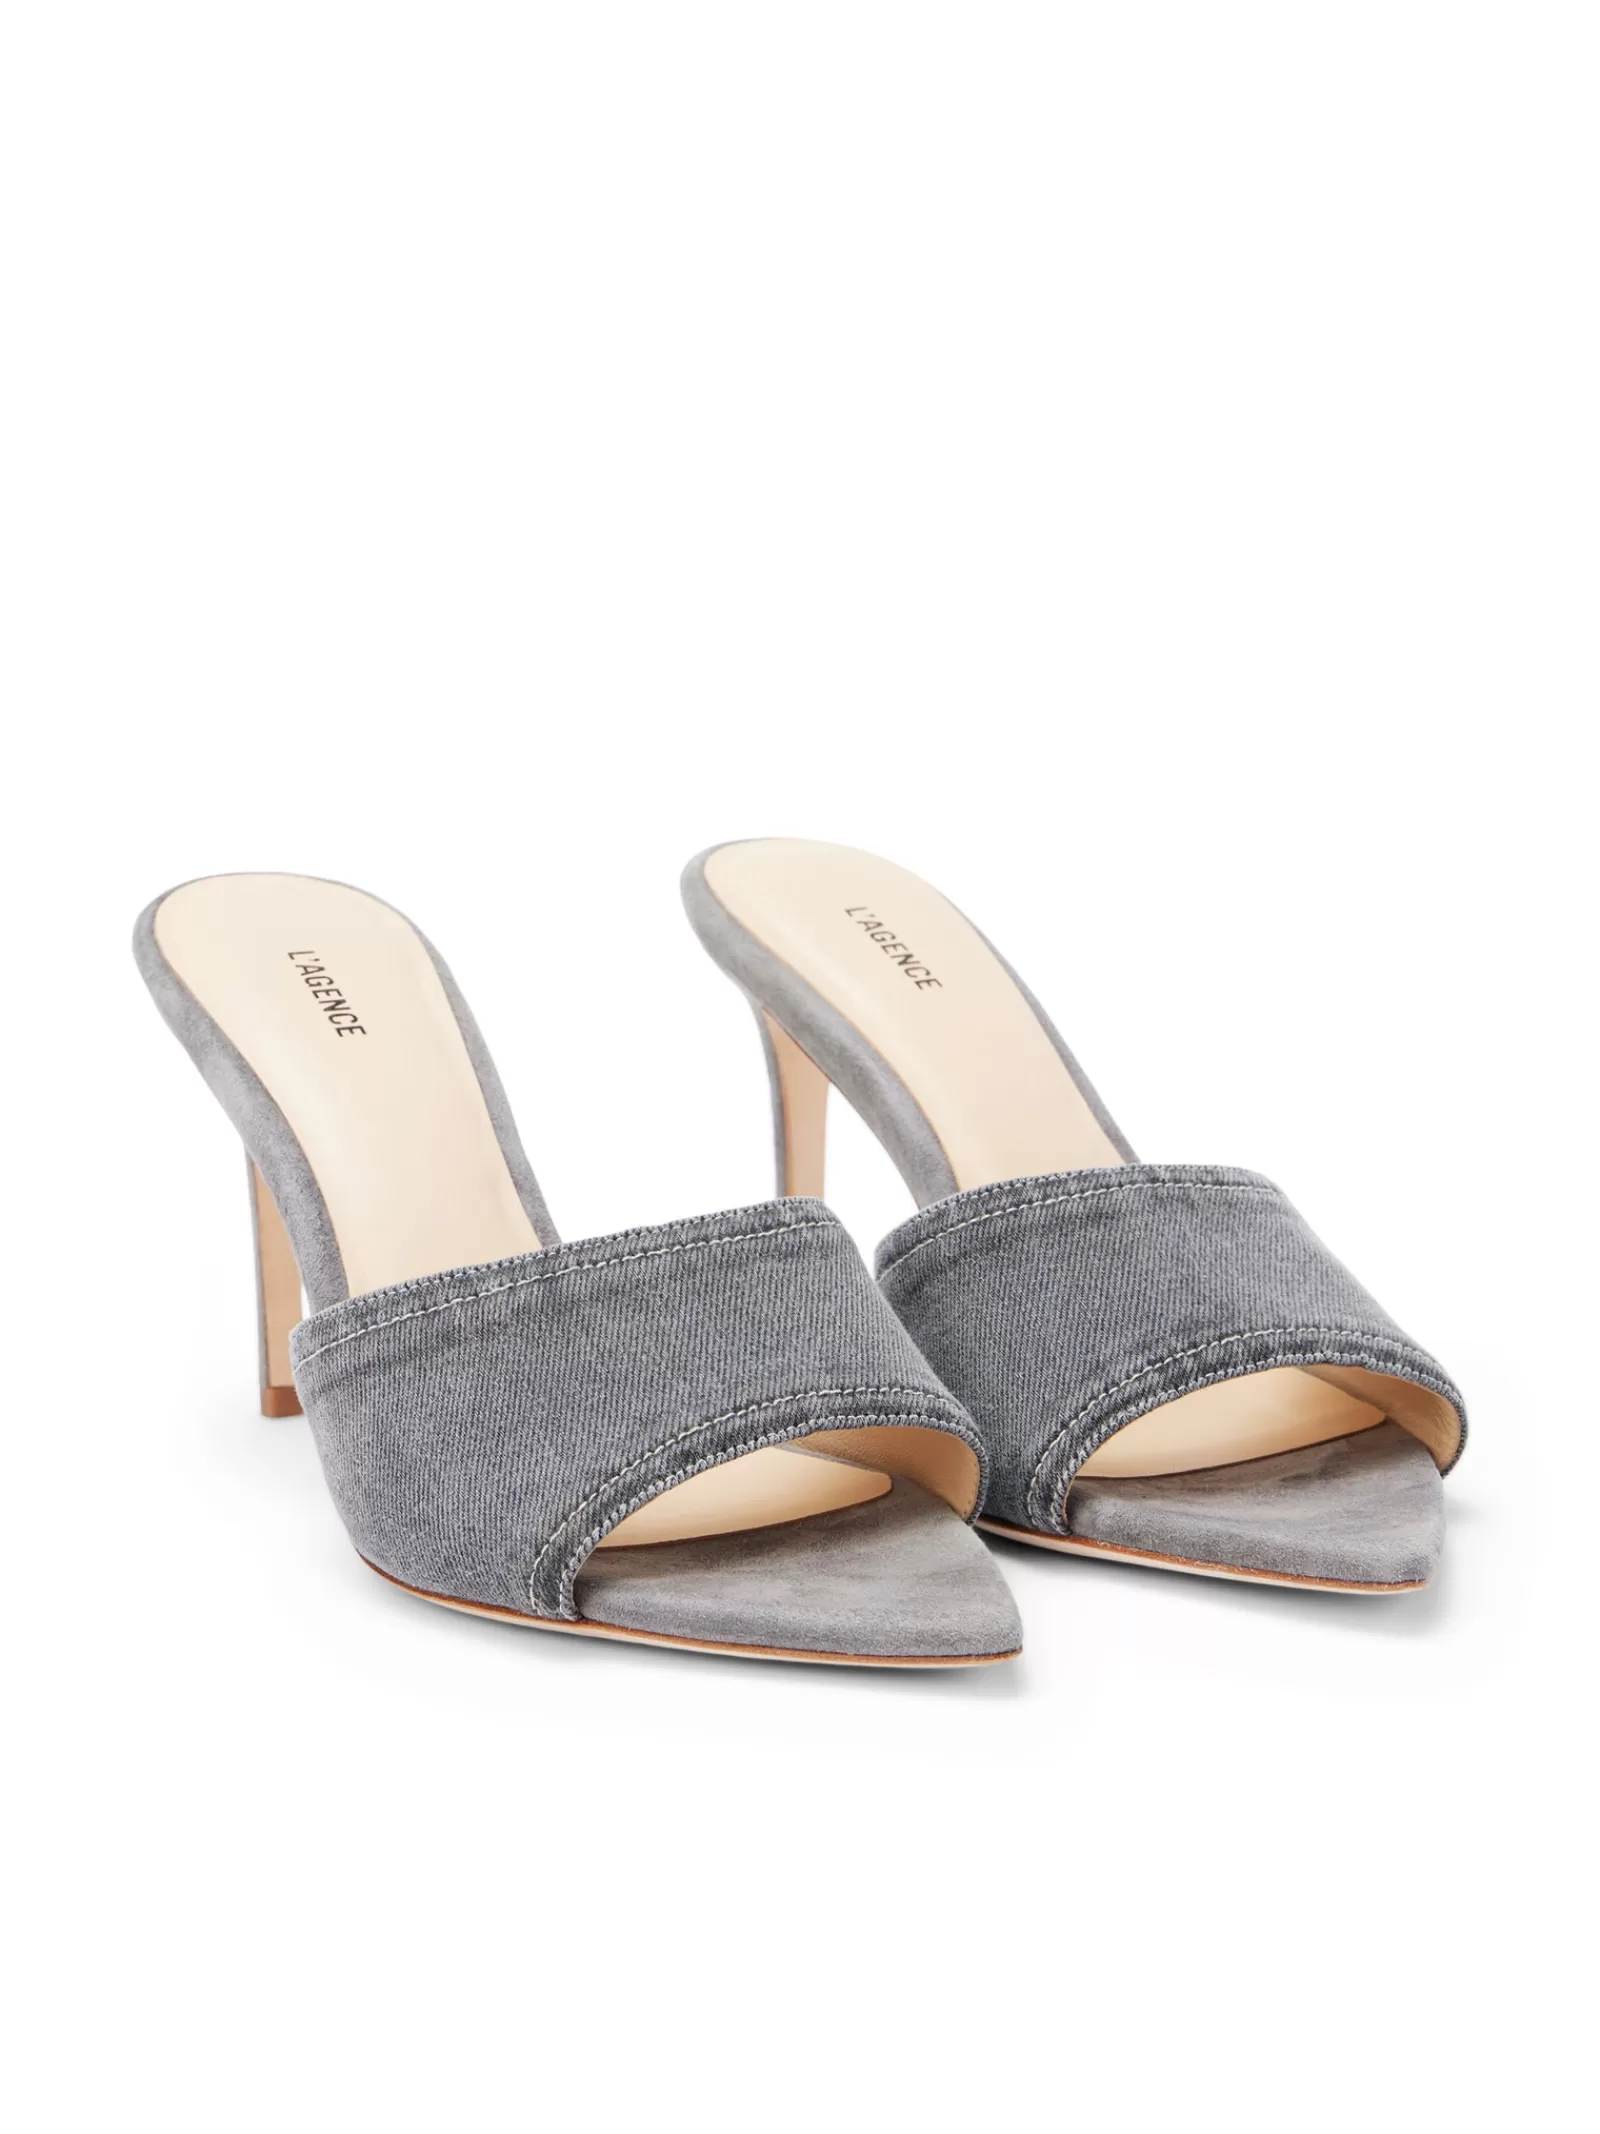 L'AGENCE Lolita Open Toe Mule< Resort Collection | Mules